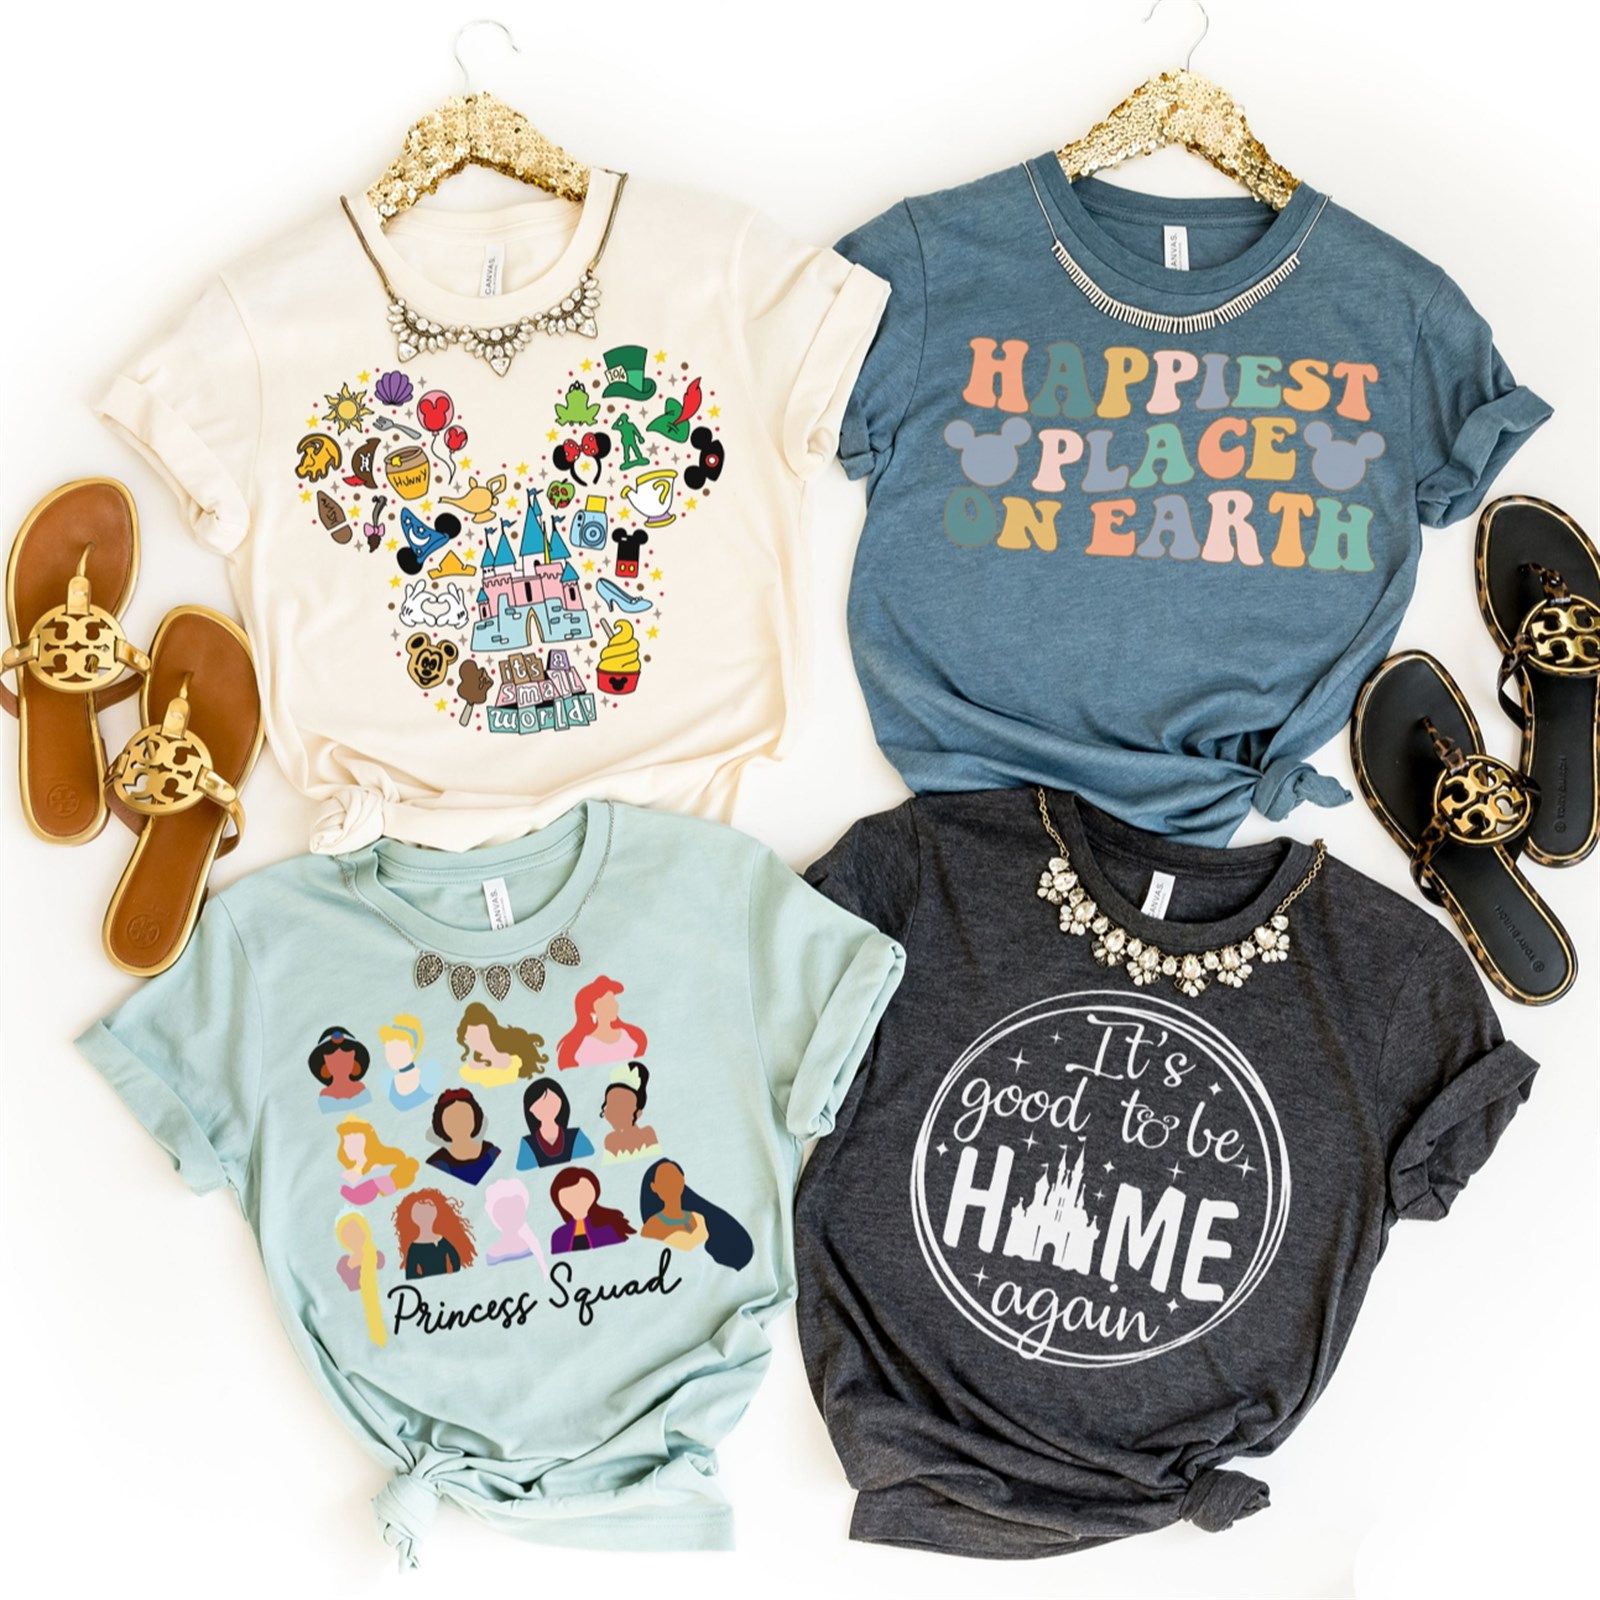 Happiest Place On Earth Tees | Jane